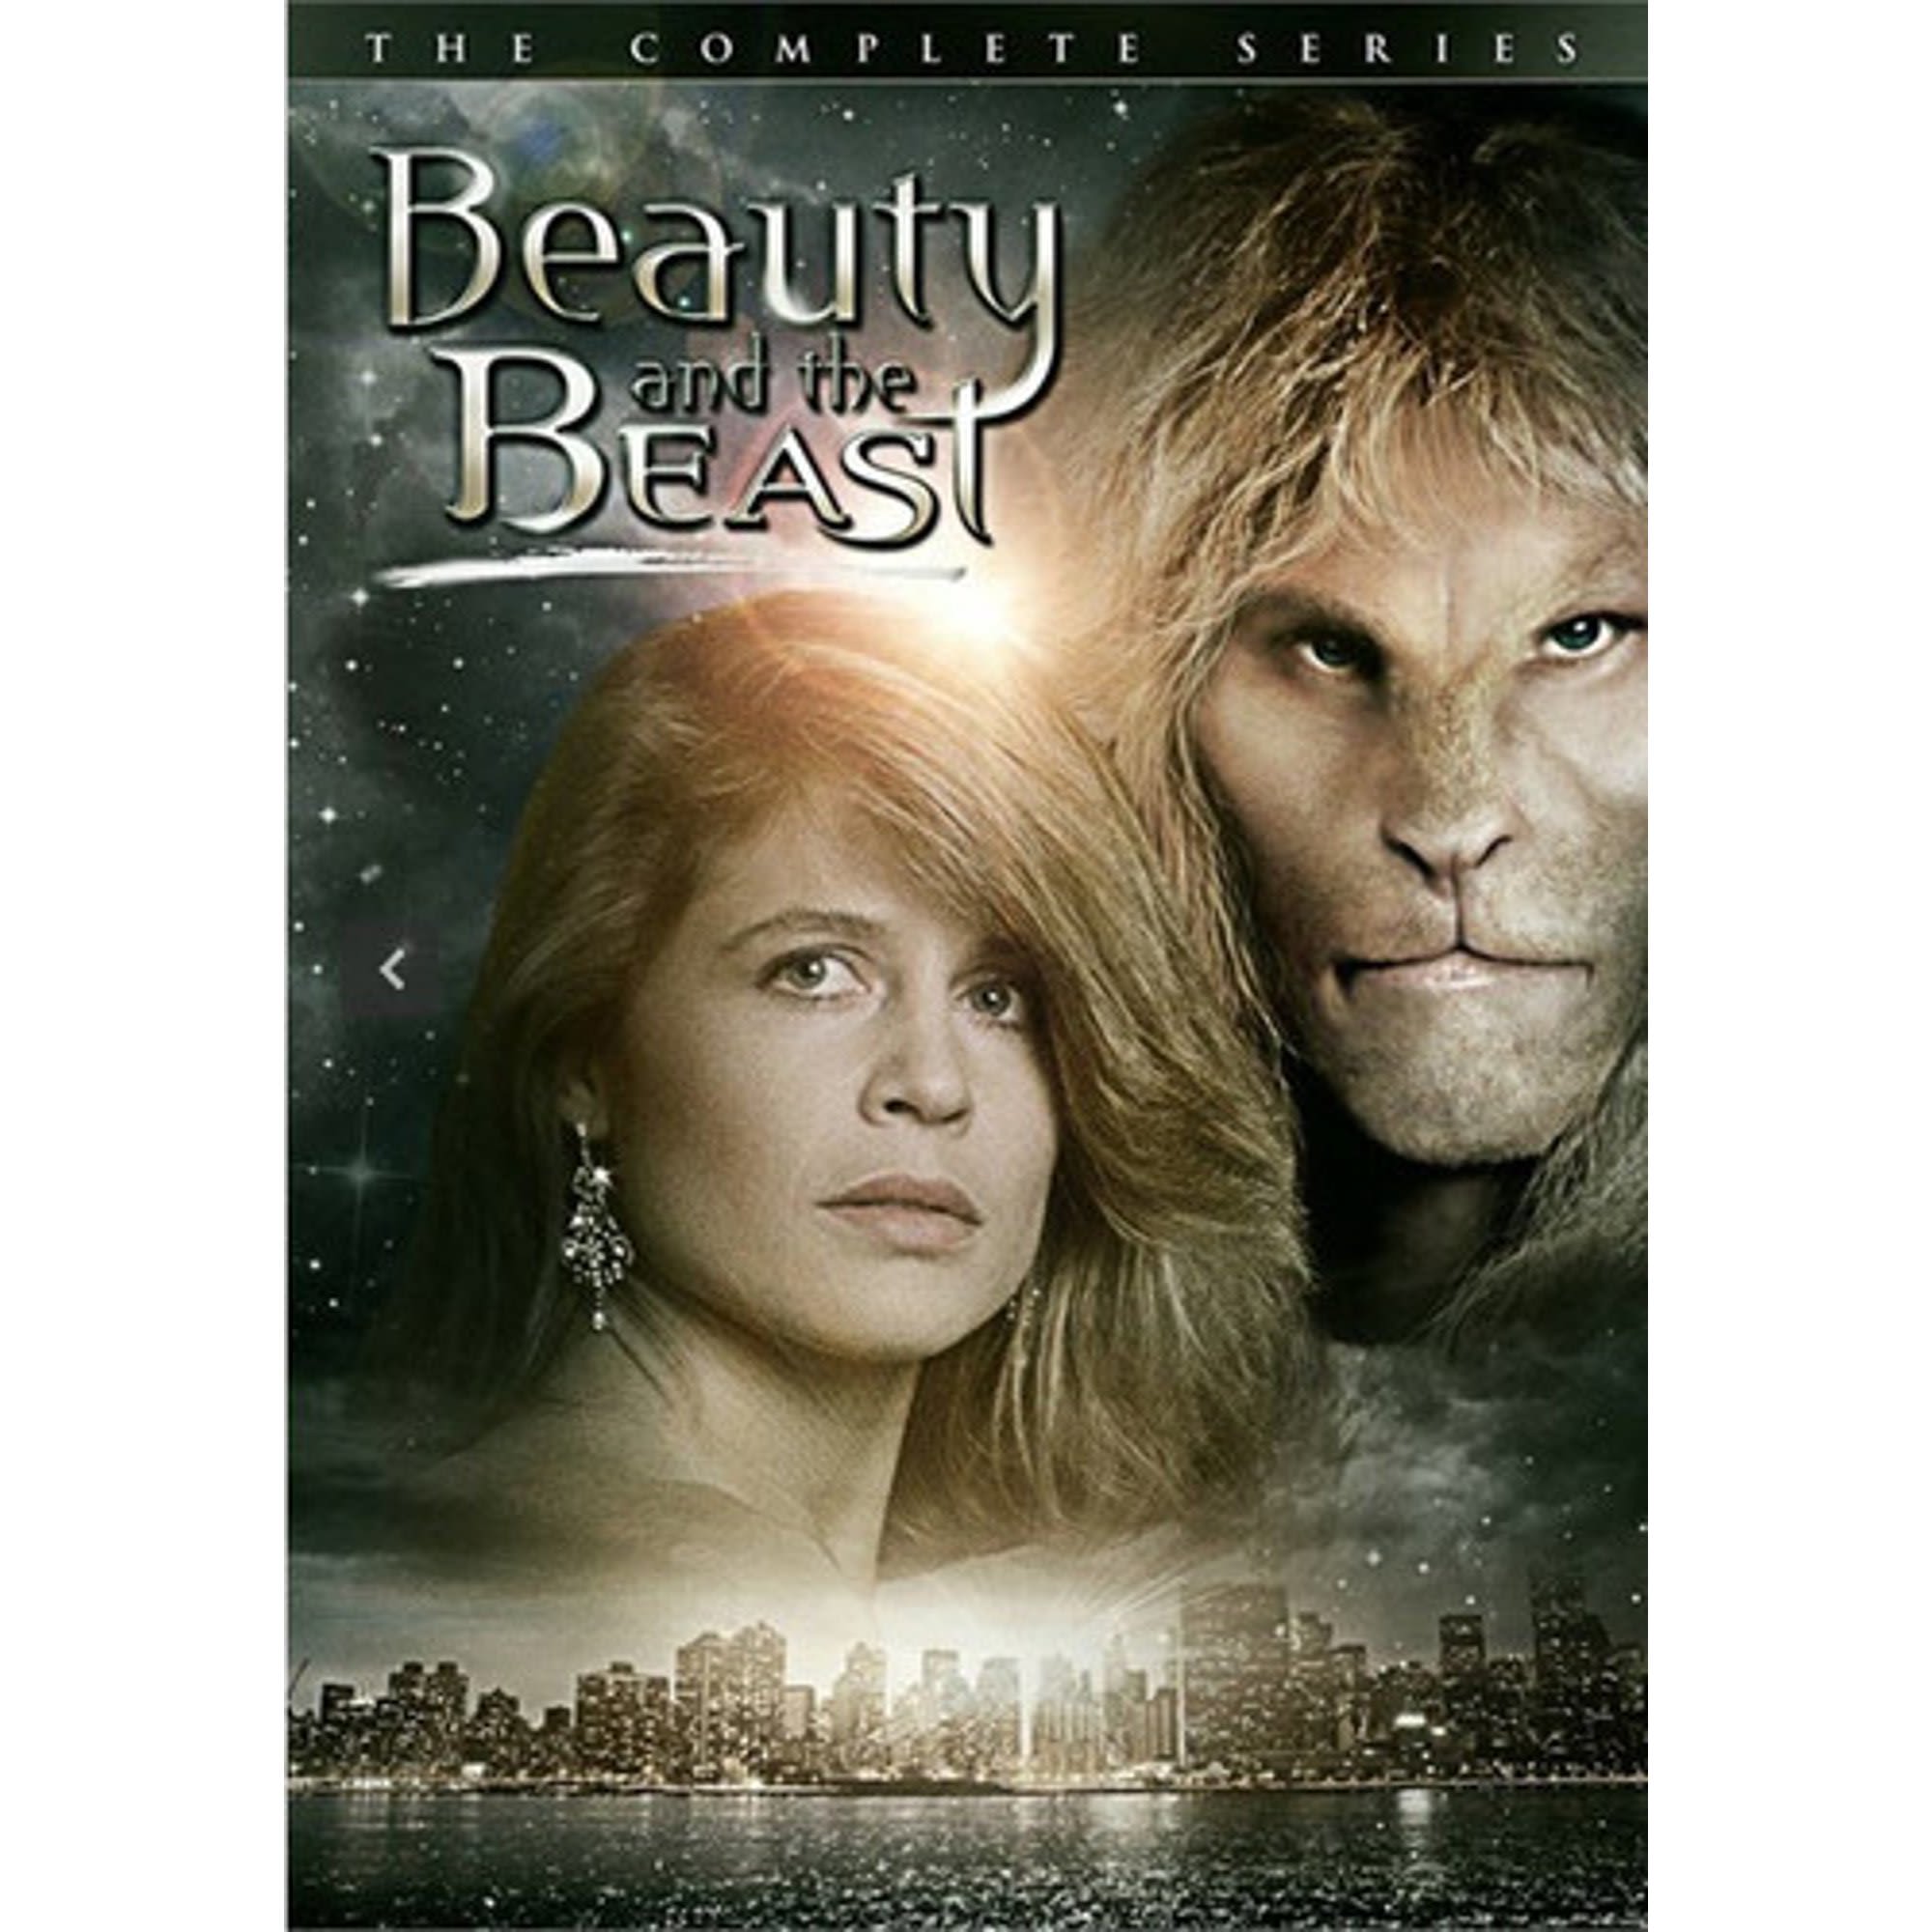 Beauty and the Beast: Complete Series (DVD) on MovieShack